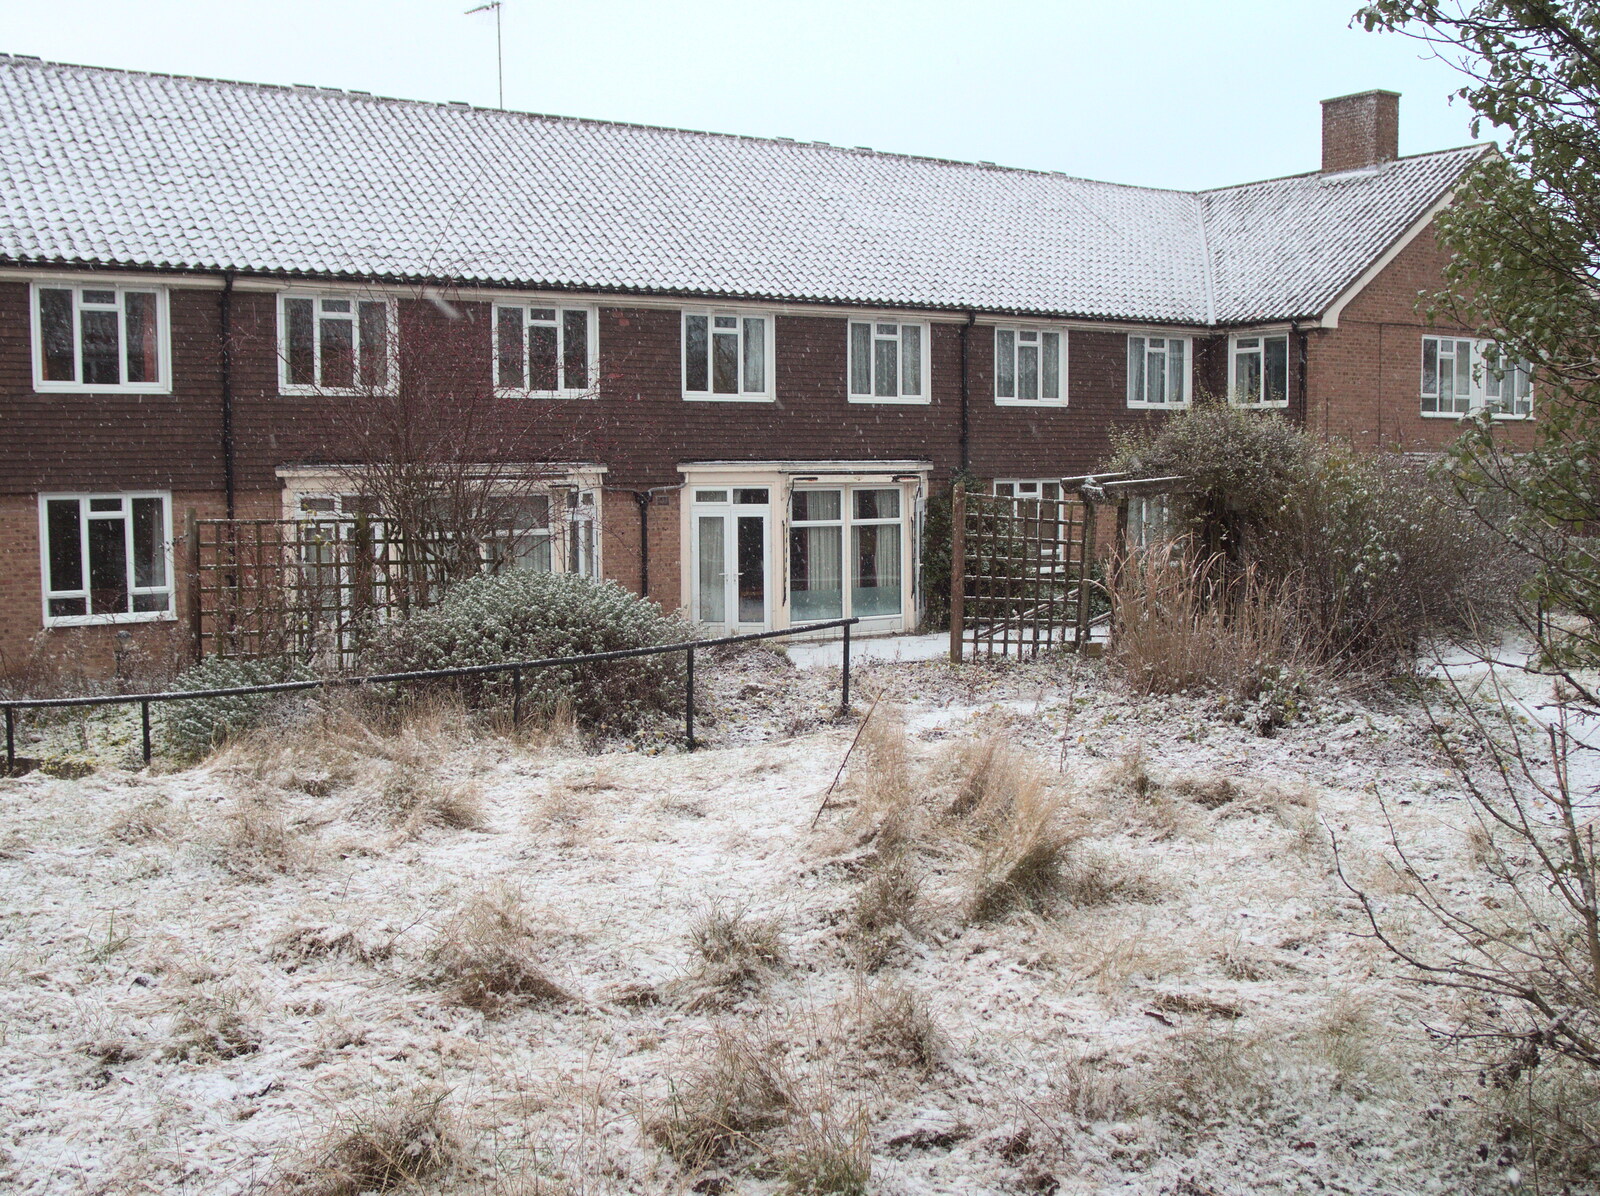 The old Paddock House care home is now closed  from A Snowy January Miscellany, Eye, Suffolk - 15th January 2017